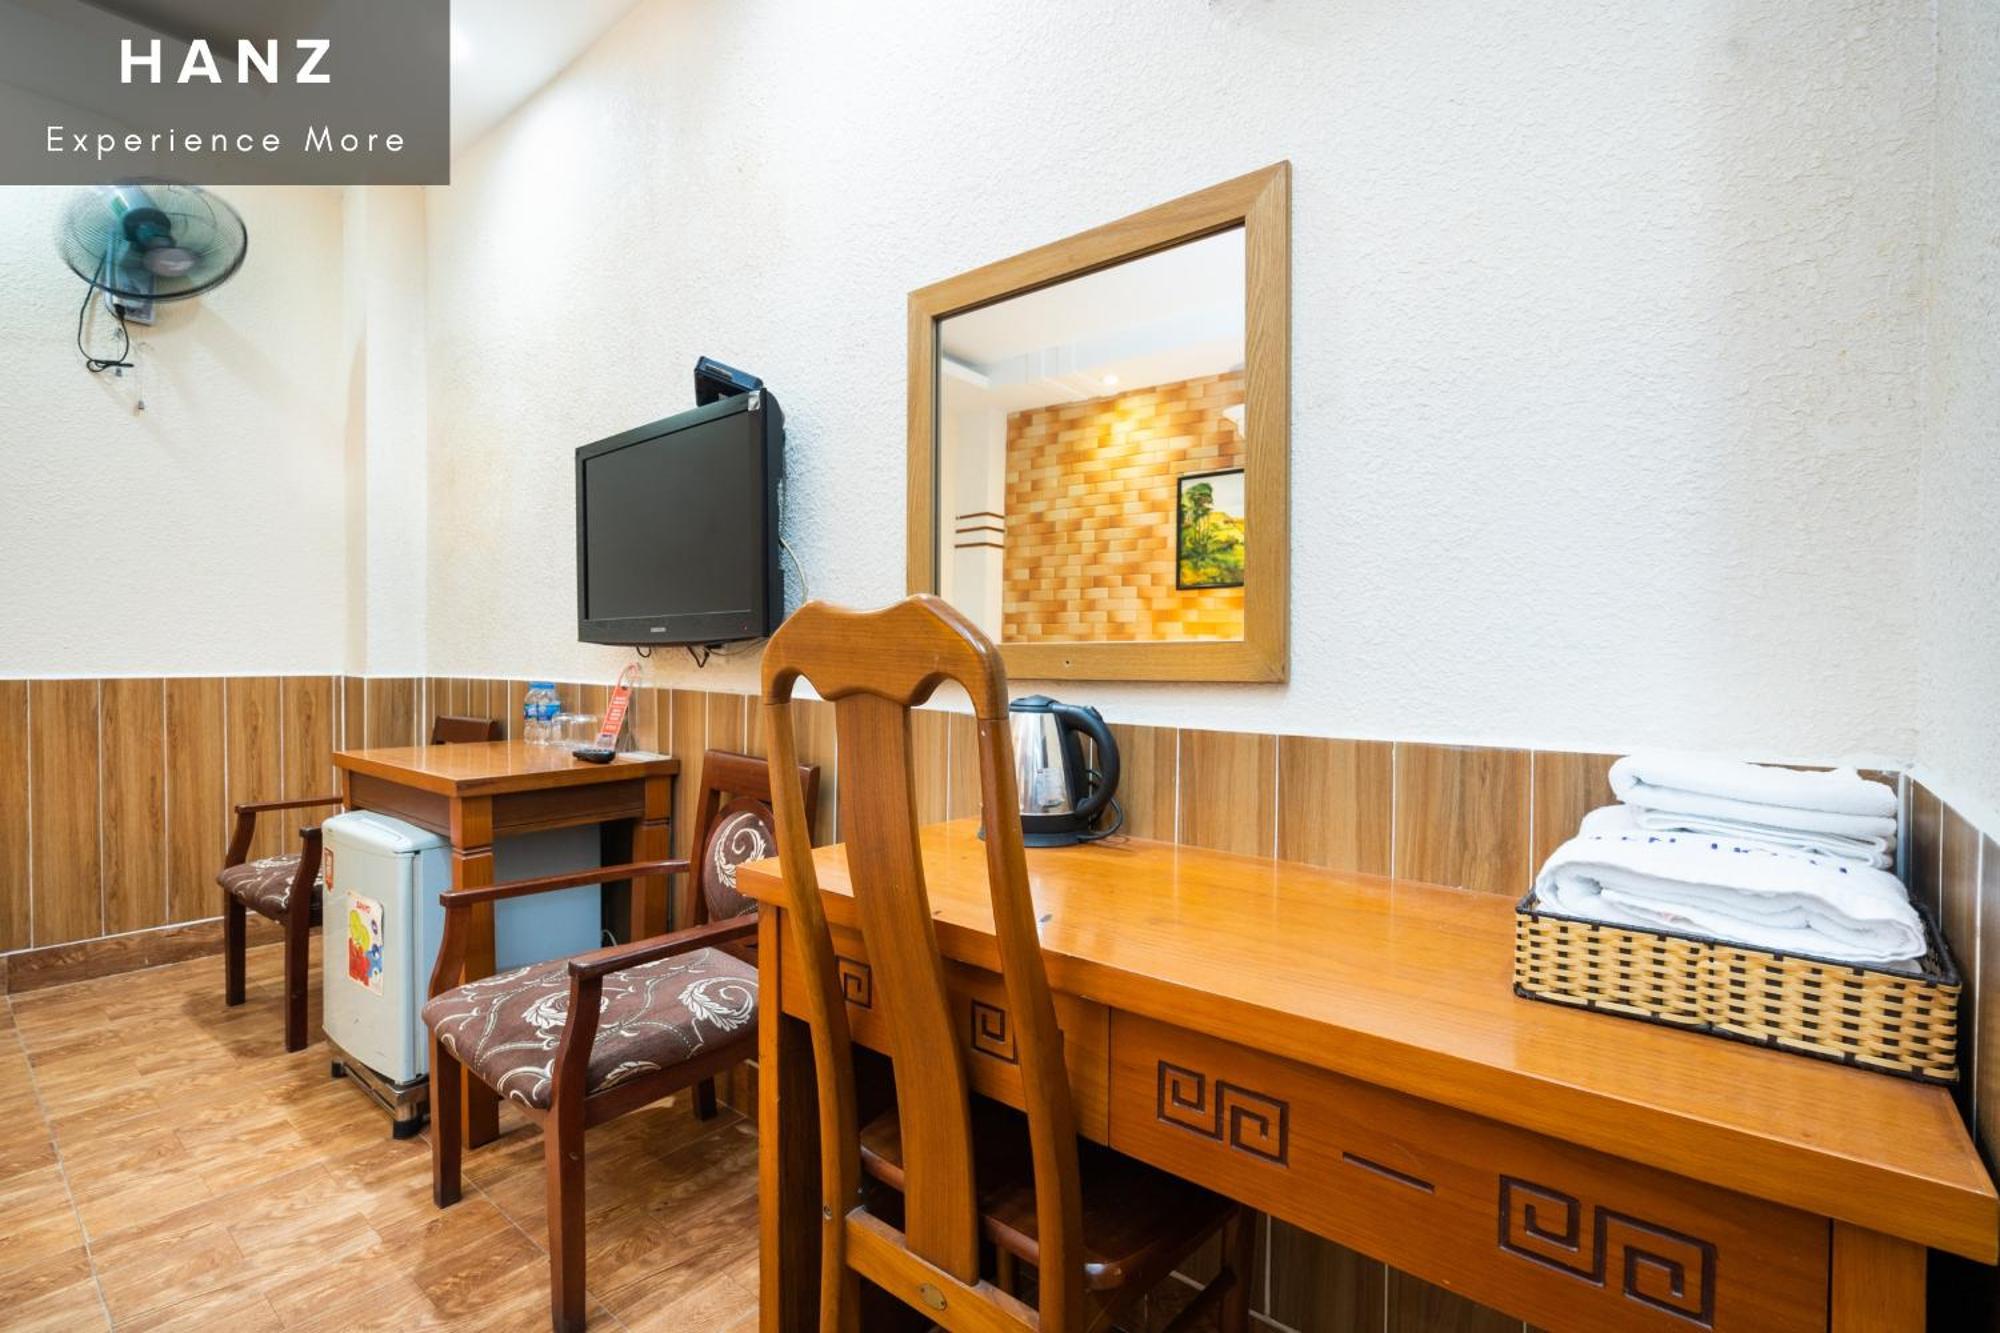 Hanz Queen Airport Hotel Ho Chi Minh City Room photo